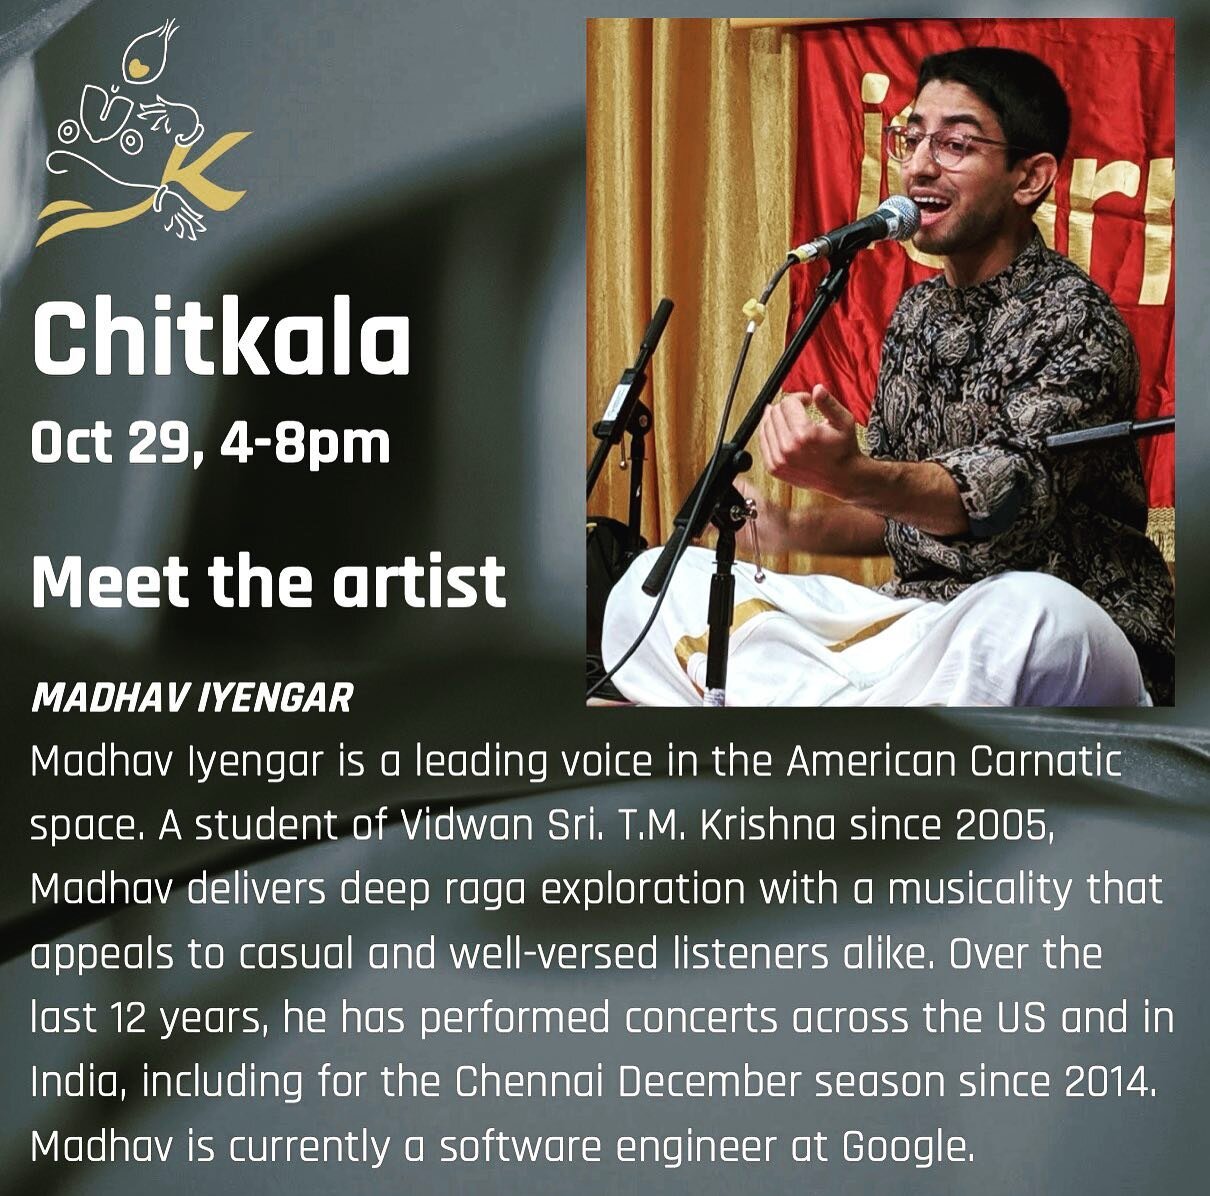 Come and enjoy an incredible Carnatic vocalist Madhav Iyengar on Oct 29th from 4-5pm Meet and Greet ; 5-8pm music concert. Message me for rsvp link!